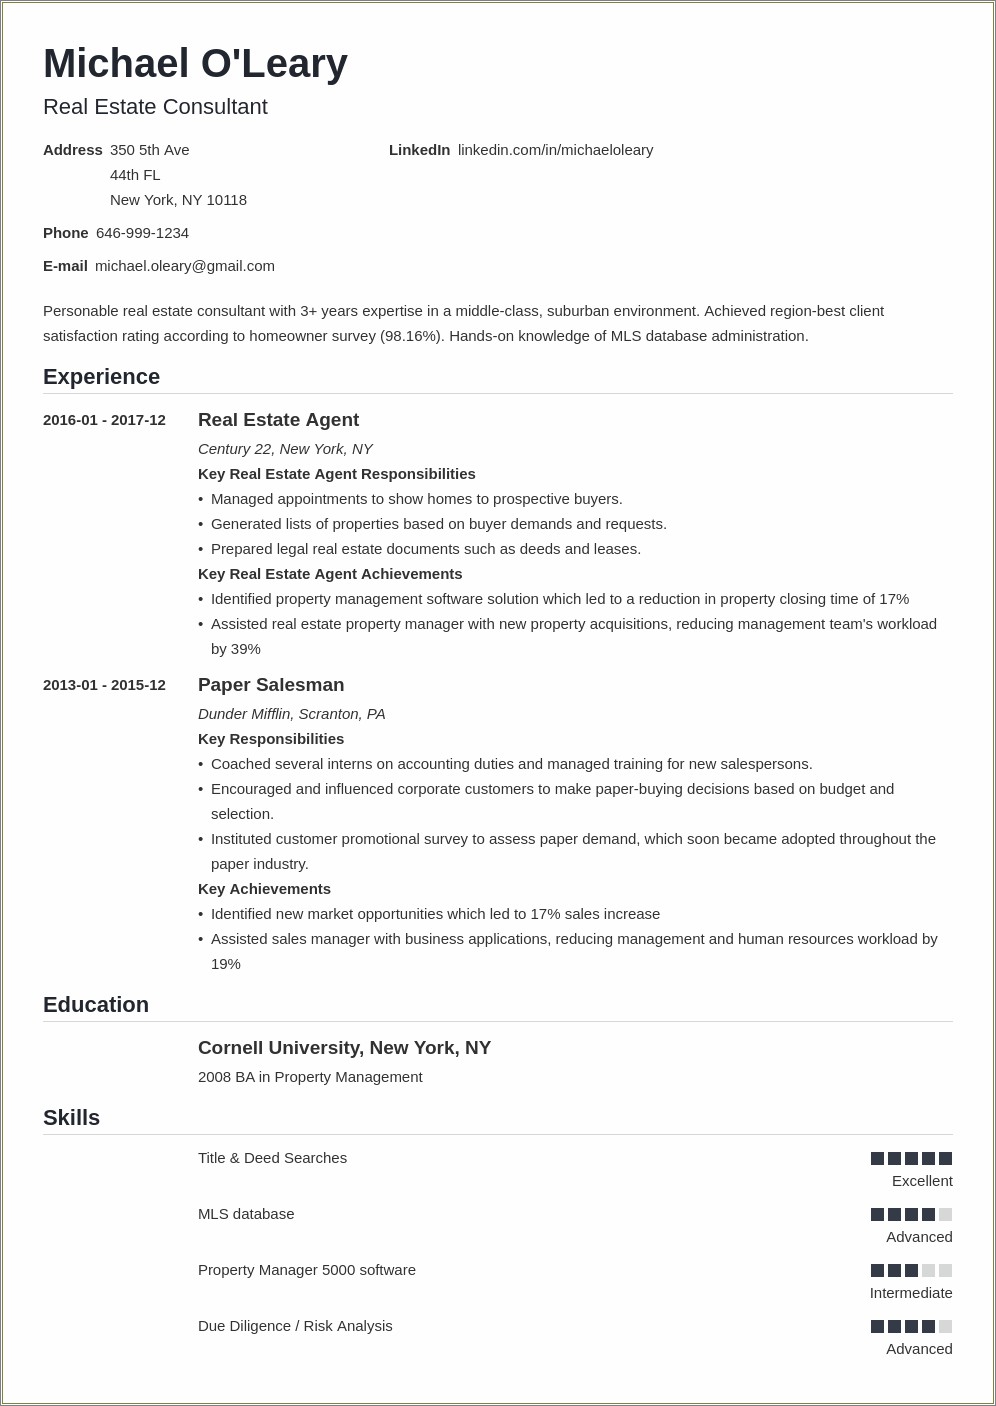 Resume To Get A Real Estate Job